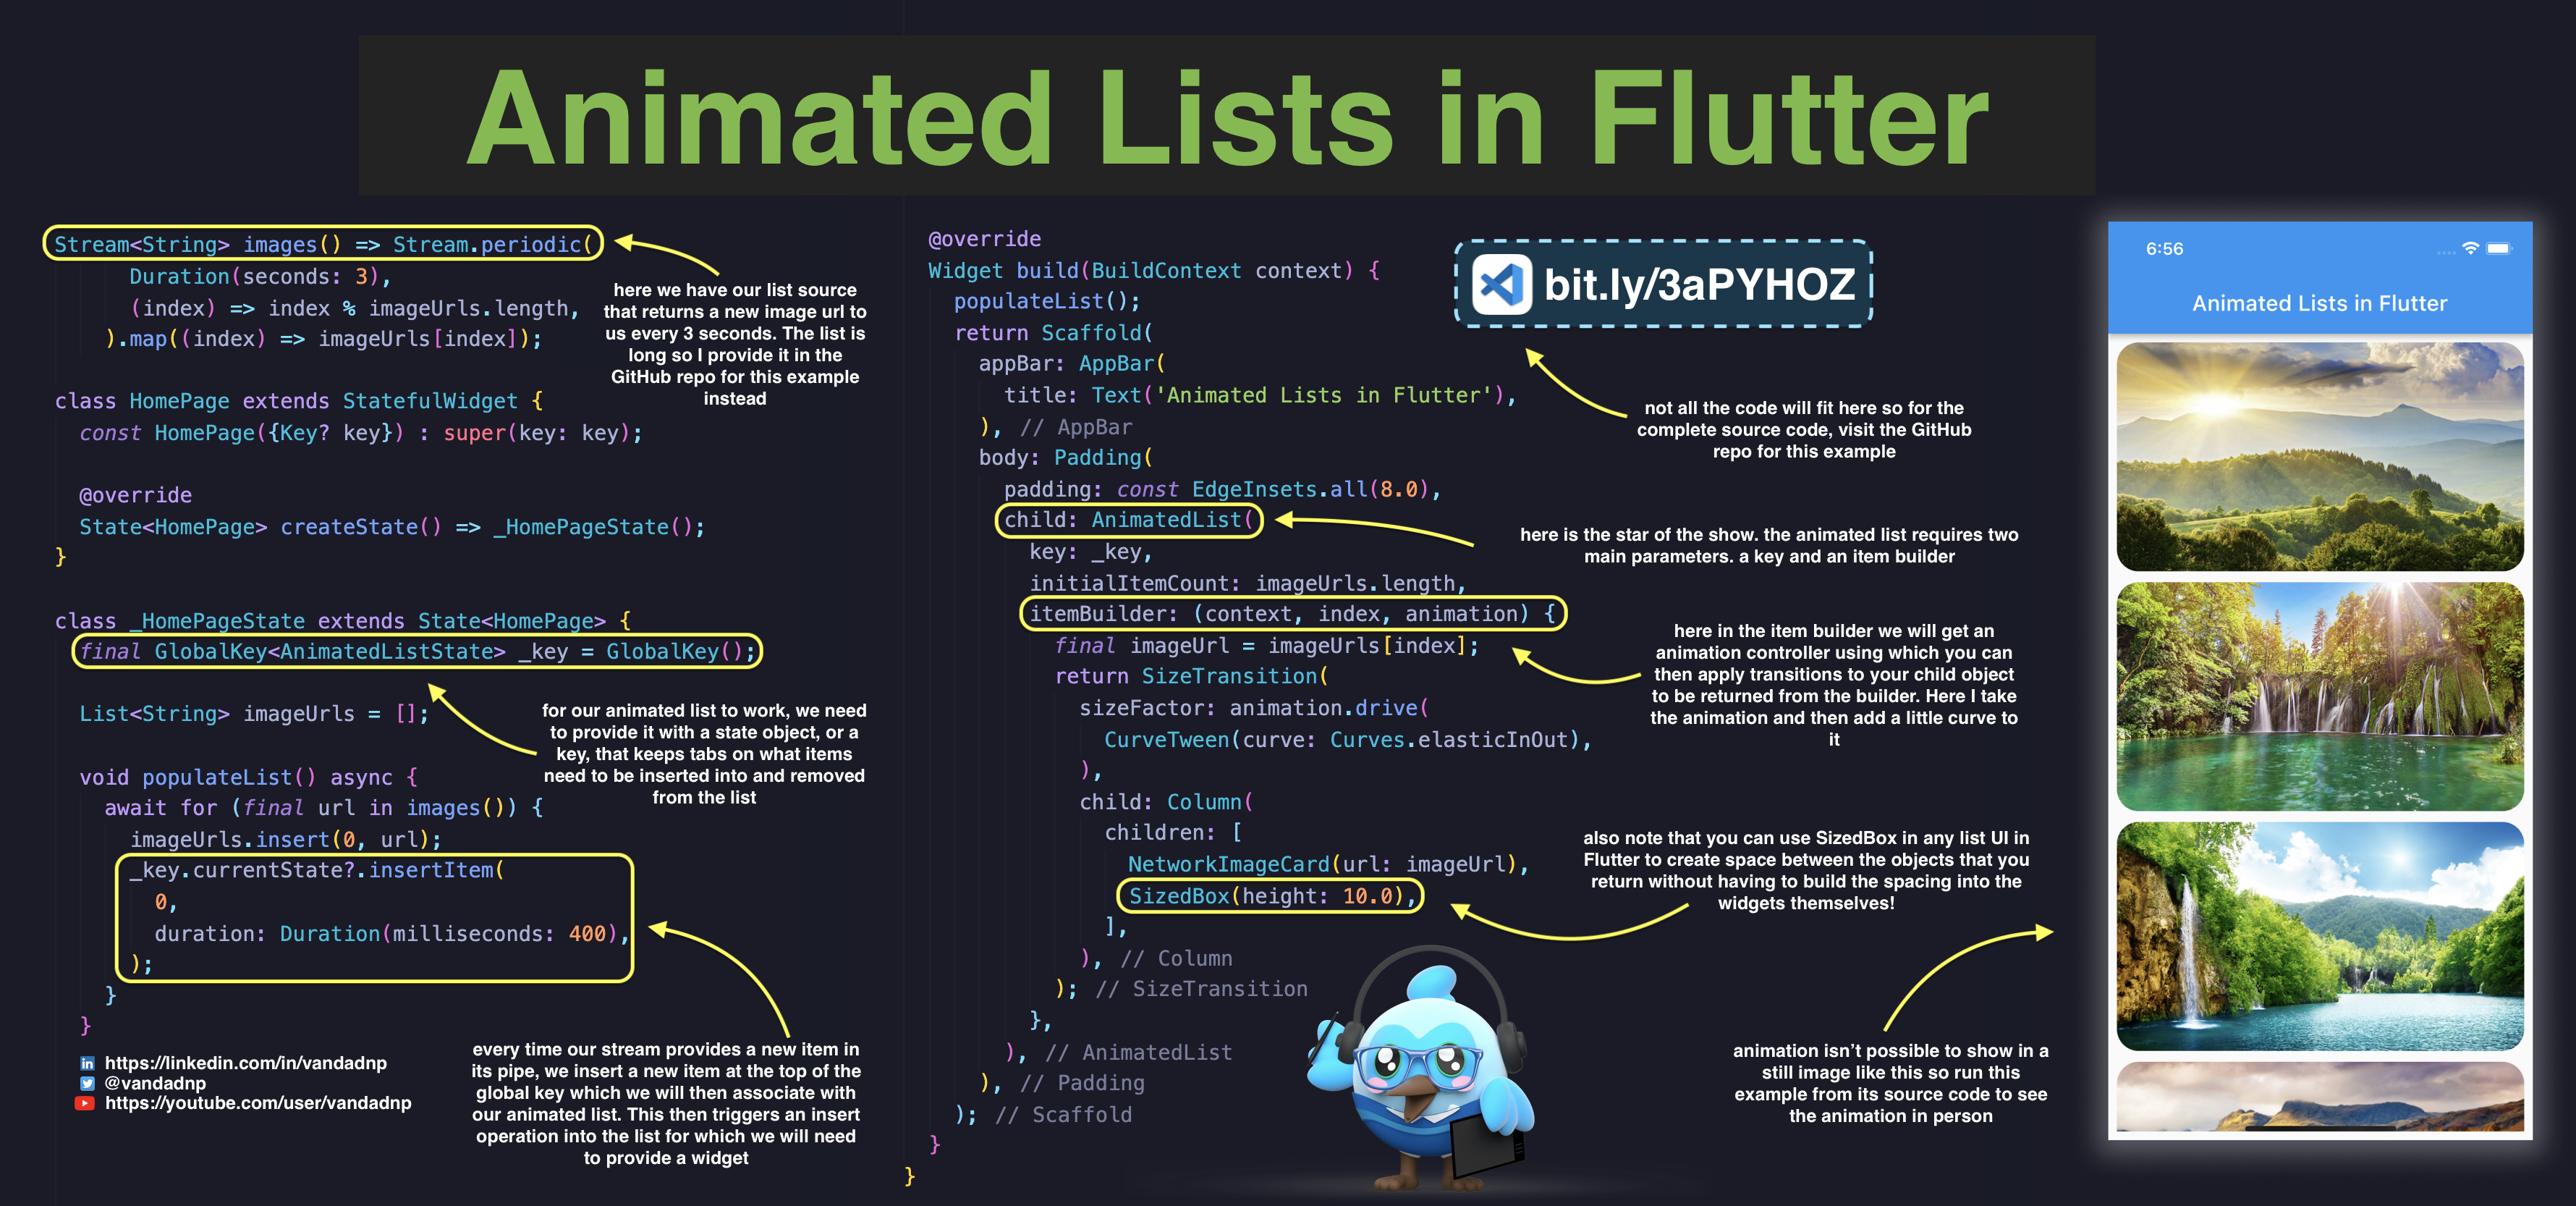 animated-lists-in-flutter.jpg